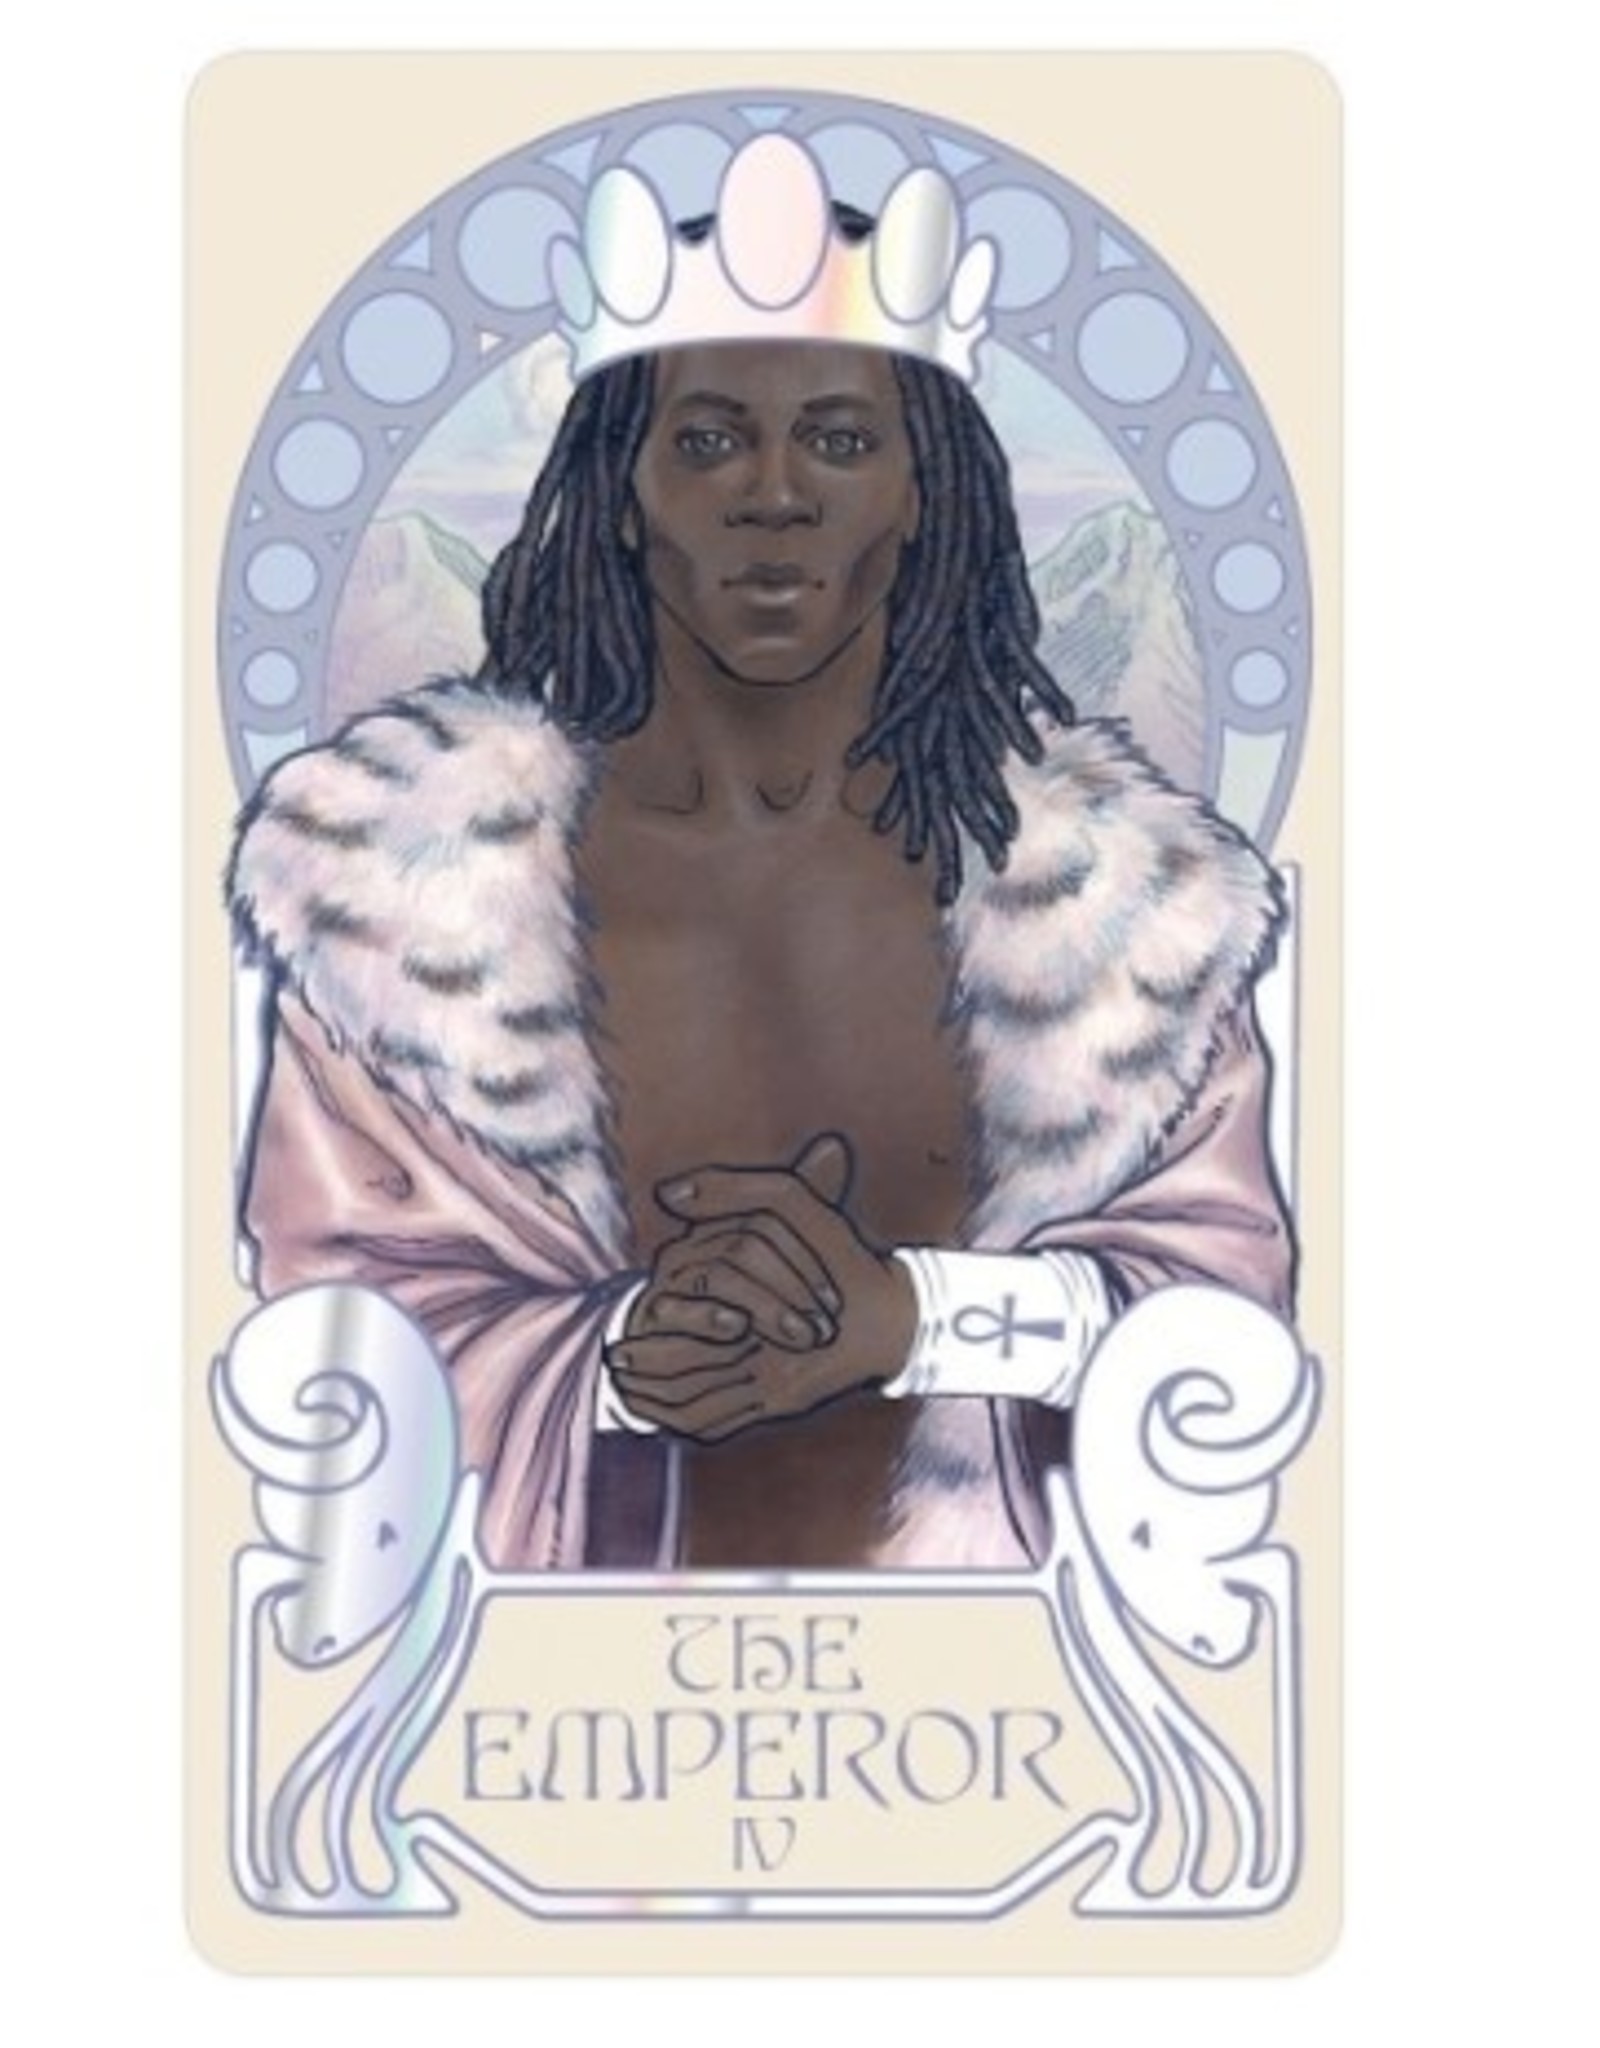 U.S. Games Systems, Inc. Ethereal Visions Tarot: Luna Edition